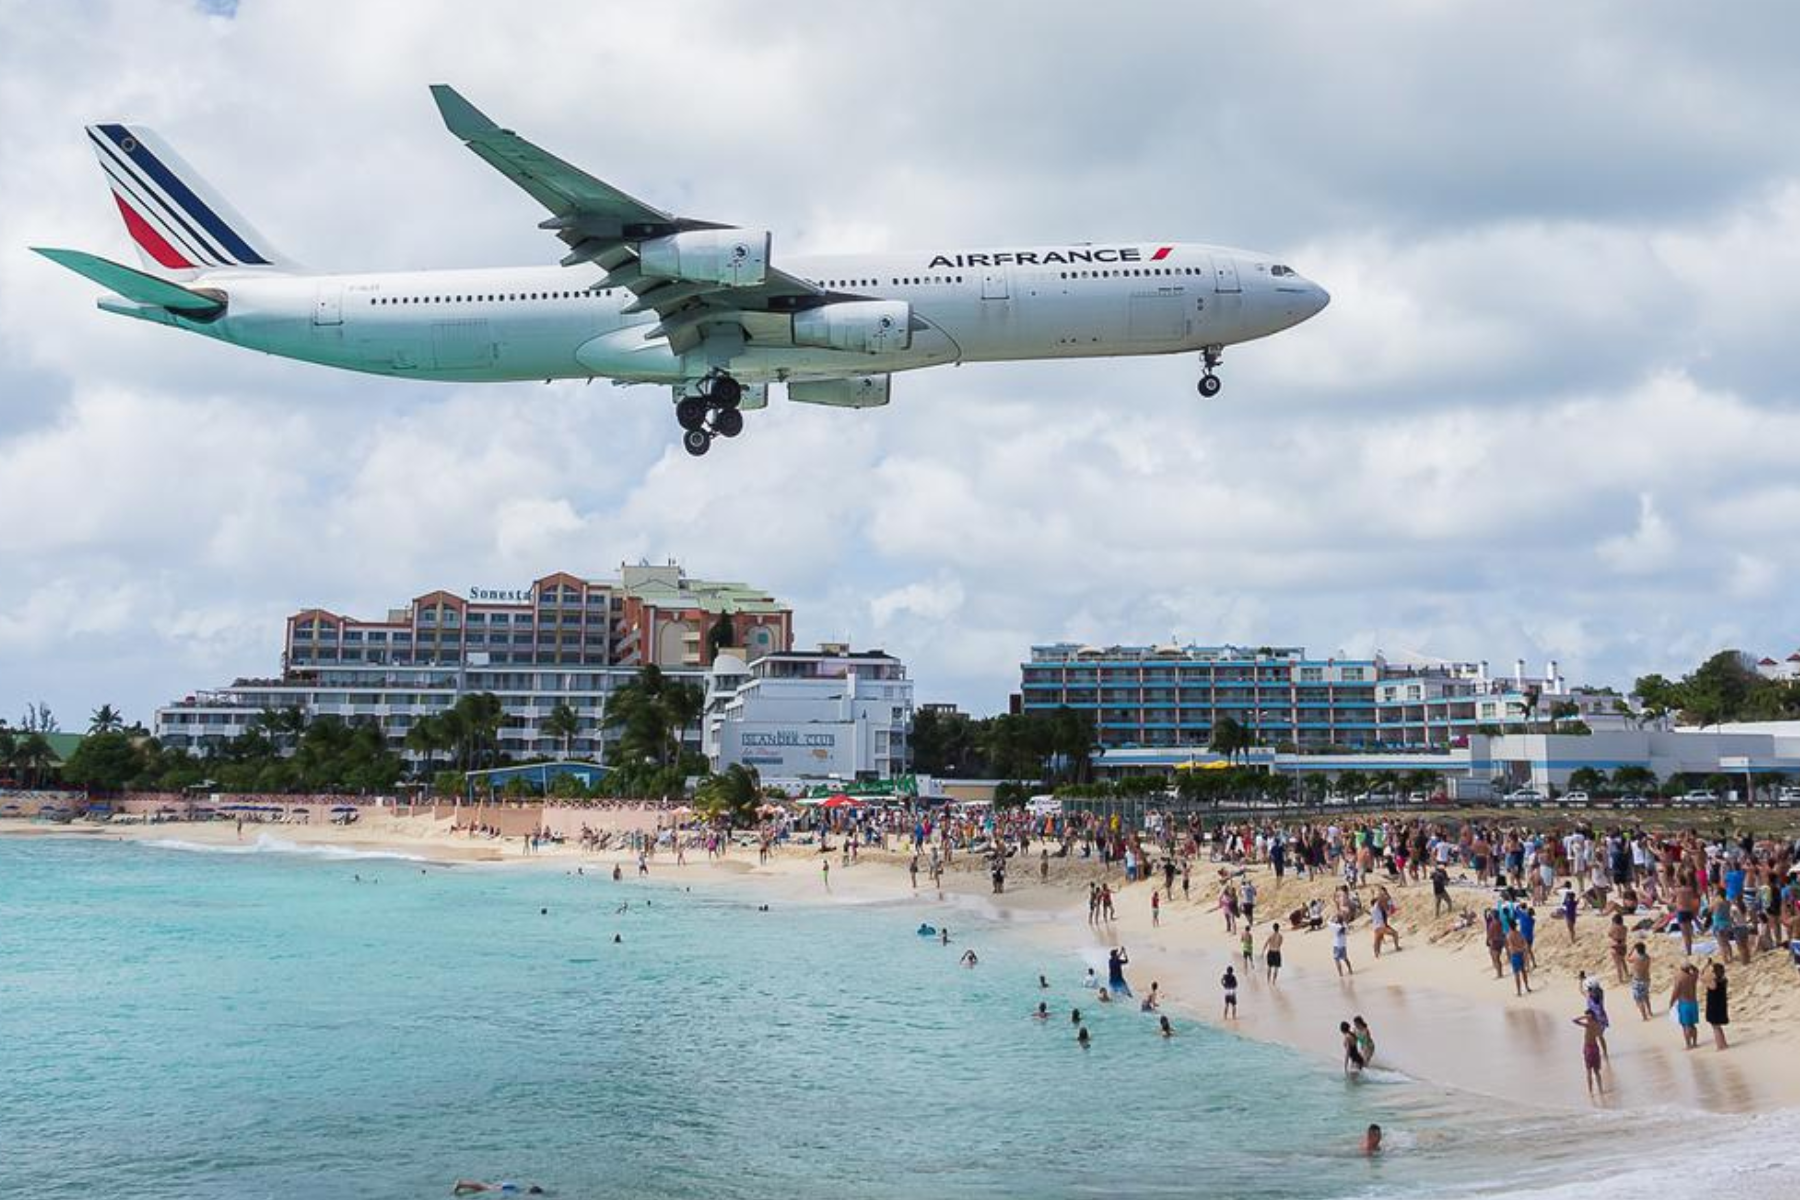 A plane from Air France lands on a beach in Europe